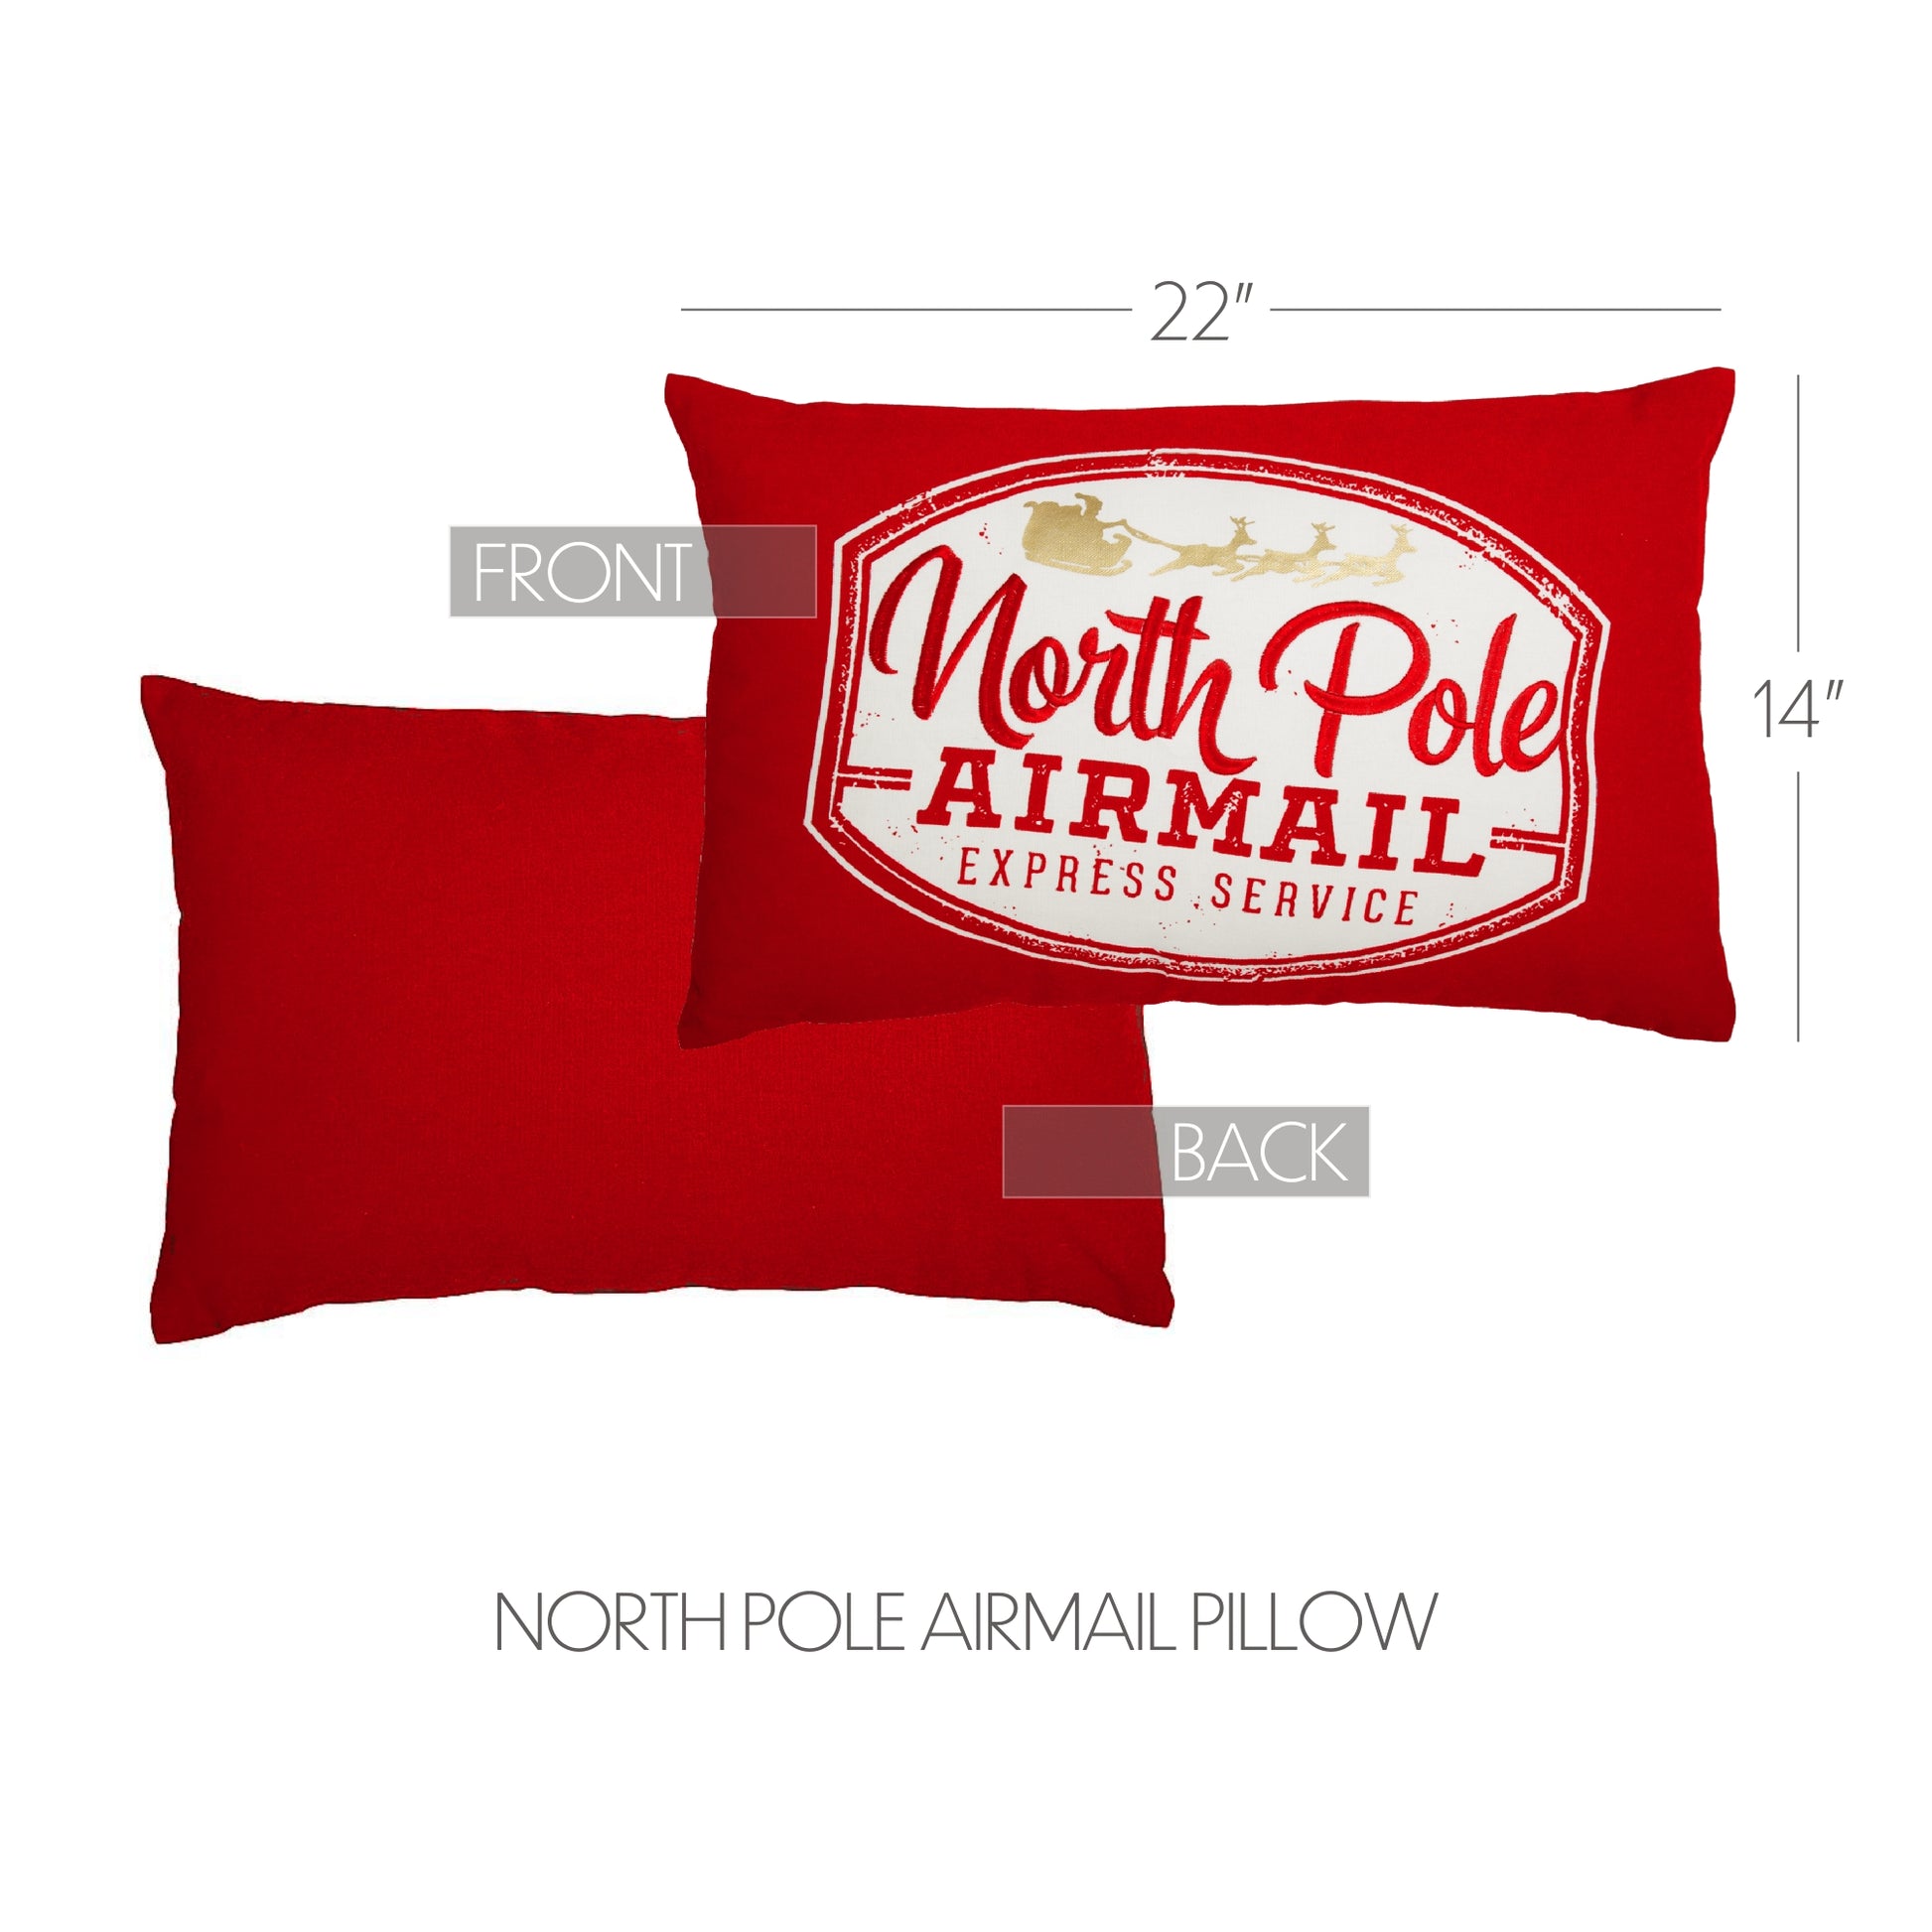 https://vhcbrands.com/cdn/shop/products/60359-North-Pole-Airmail-Pillow-14x22-Infographic-1.jpg?v=1670977311&width=1946